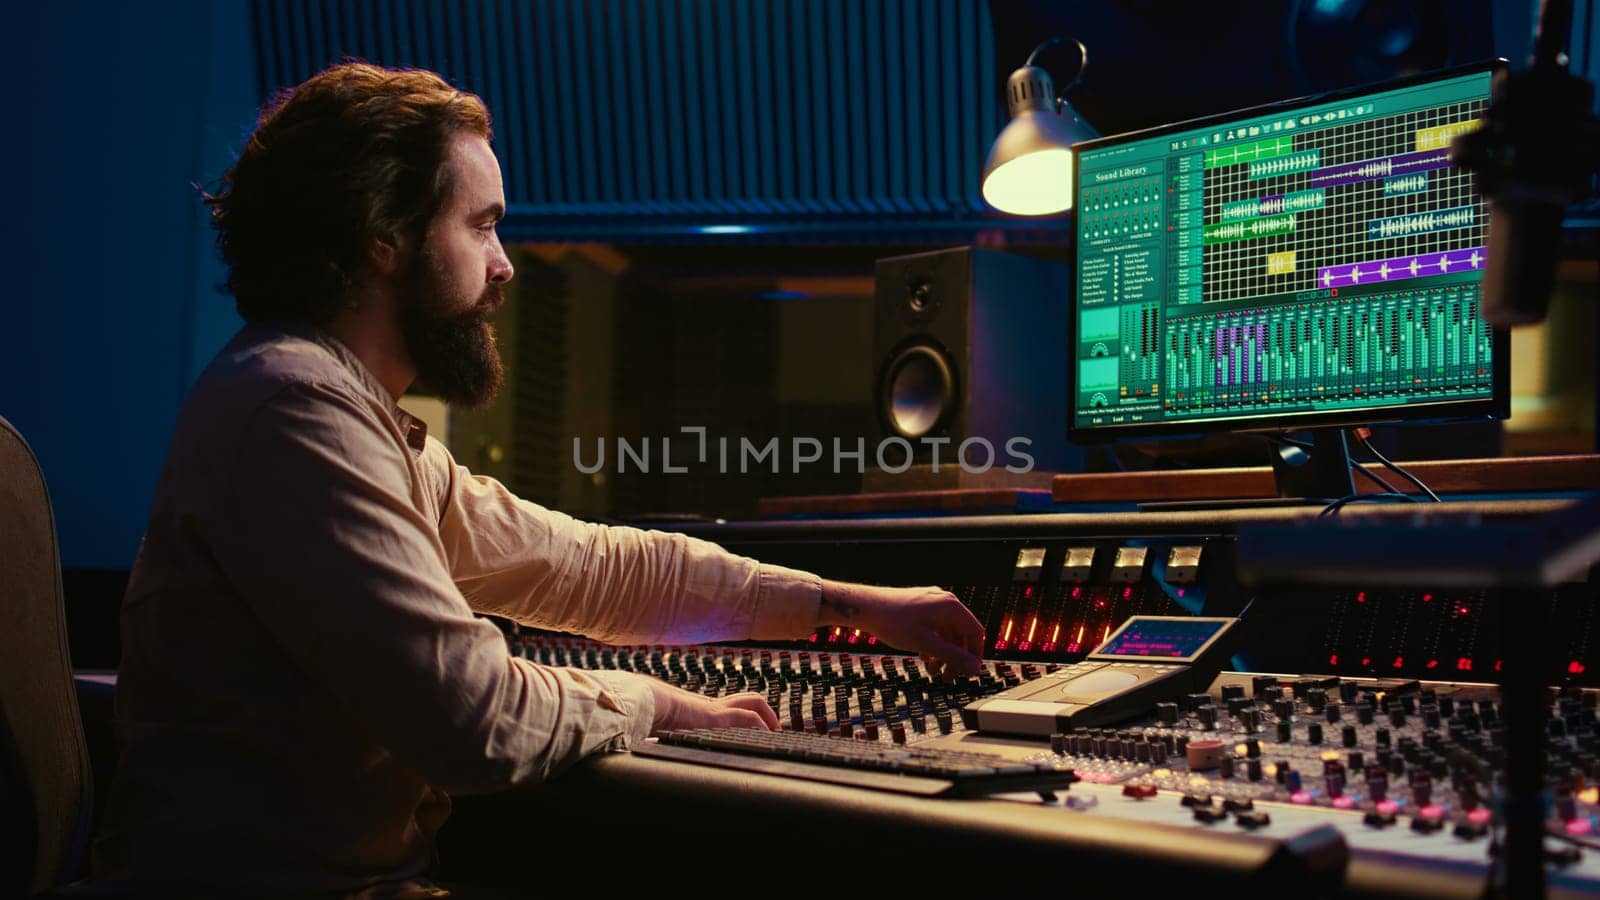 Tracking engineer editing music by adding sound effects in control room by DCStudio